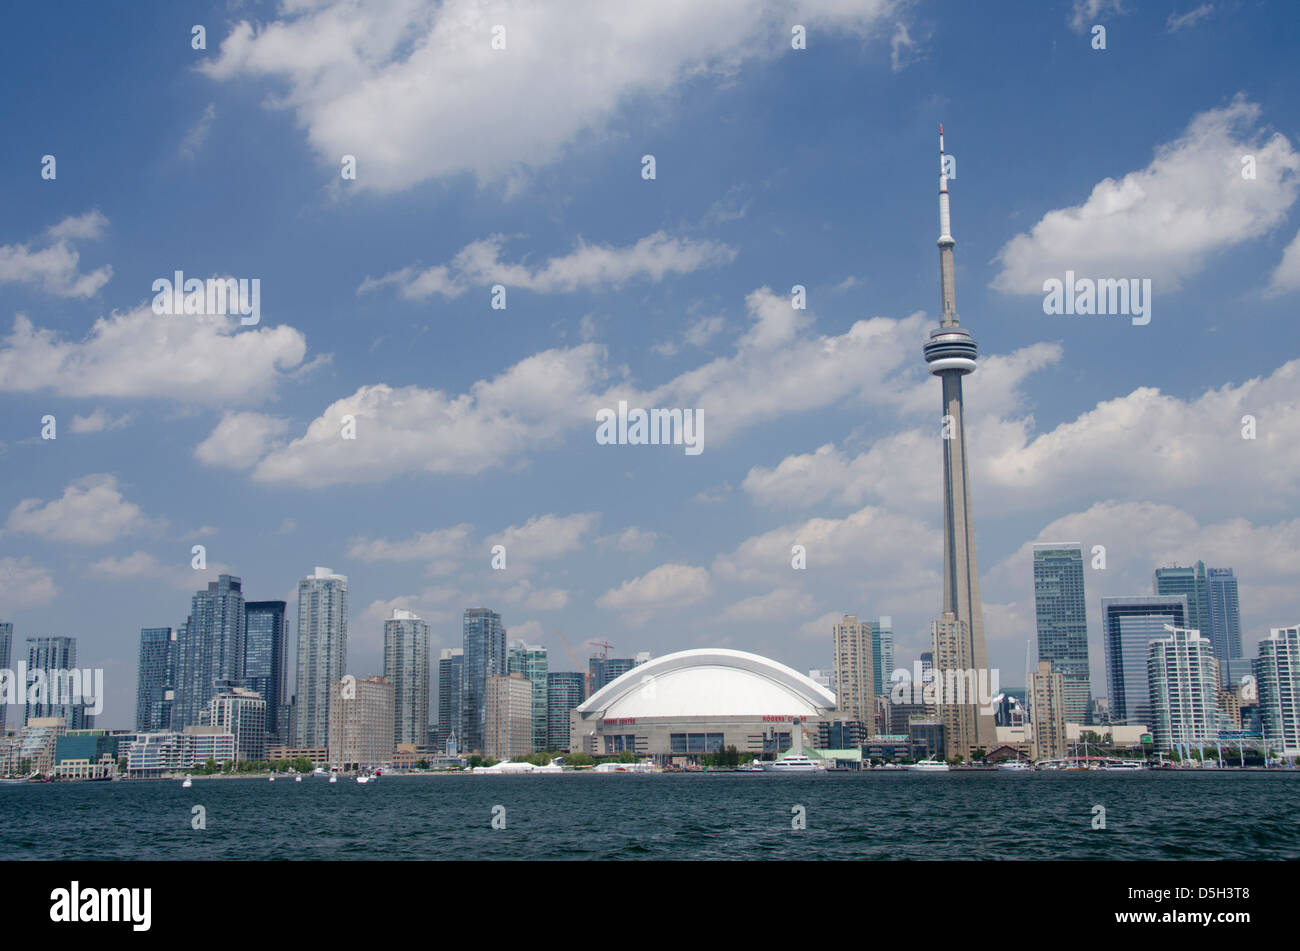 Canada, Ontario, Toronto. Lake Ontario city skyline view of the iconic CN Tower and the Rogers Centre from scenic harbor cruise. Stock Photo